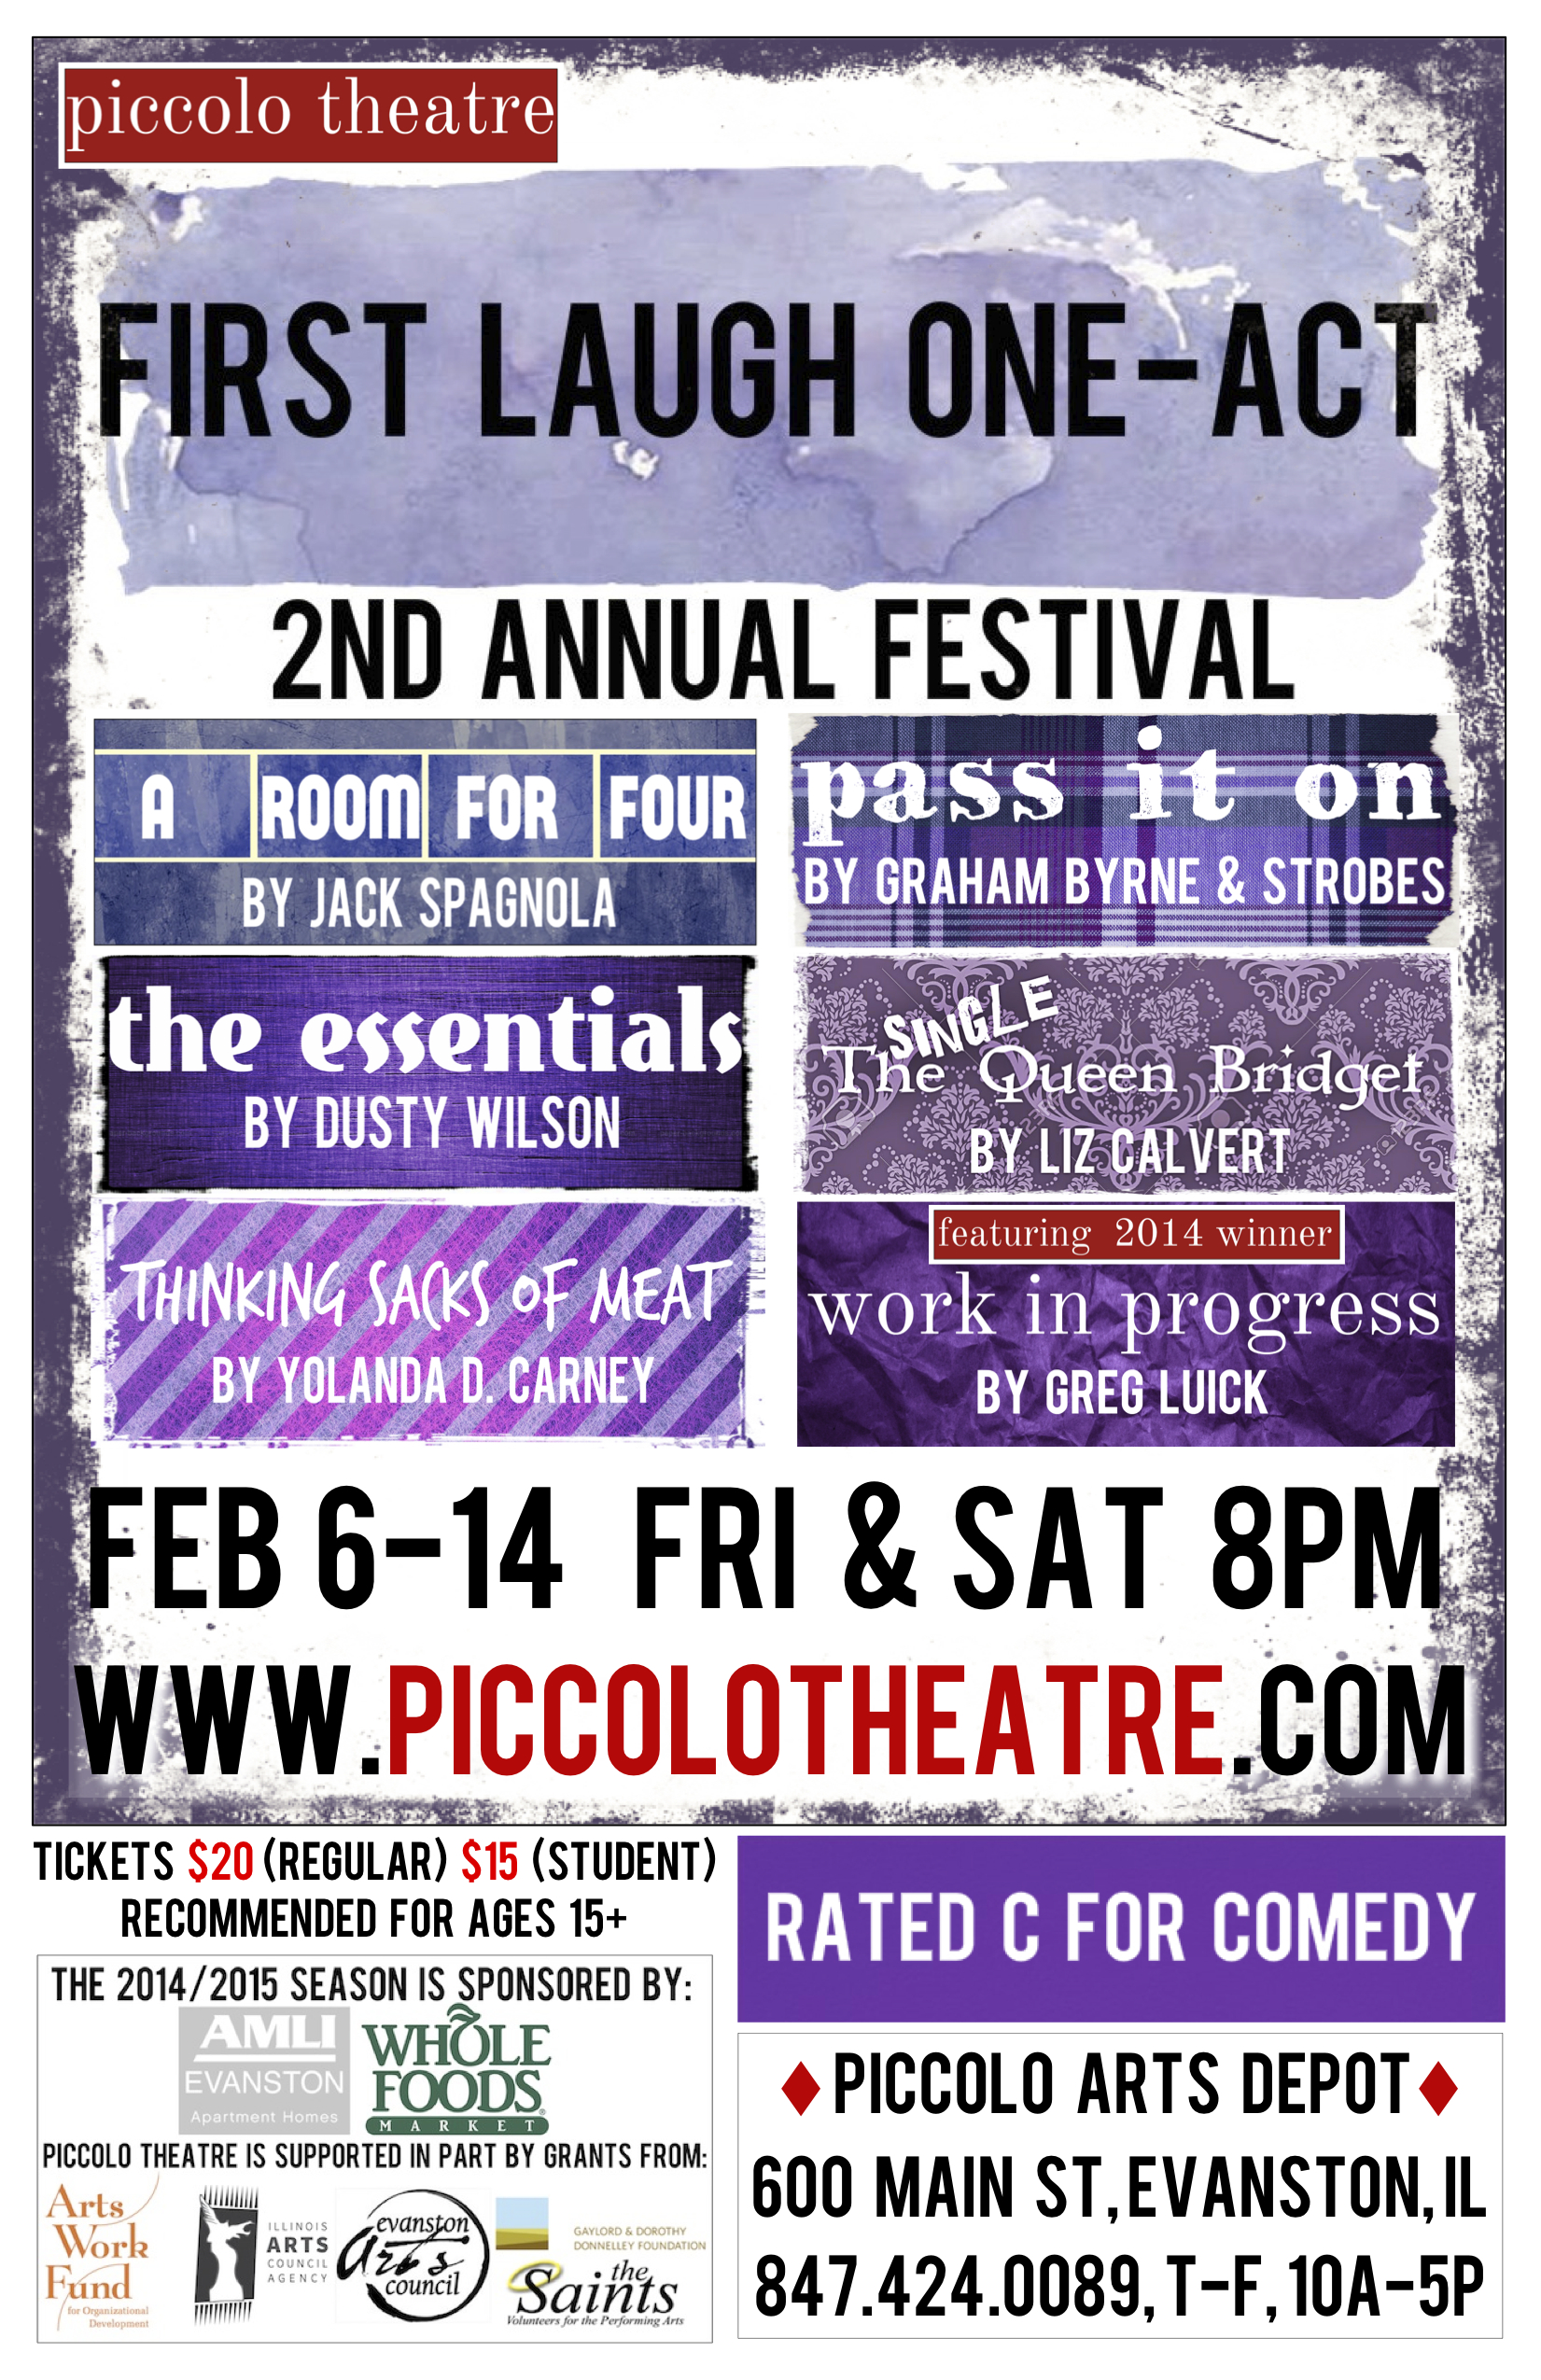 PICCOLO THEATRE'S 2nd Annual First Laugh One-Act Festival Opens February 6! 1 First Laugh returns to Piccolo Theatre in this February with five world-premiere one-act plays!  This two-weekend festival of one-act plays premieres the original work of local and regional playwrights, joining comedy writing and performance.  This juried festival will feature a fantastic prize awarded to the audience favorite.  The festival's second weekend will showcase Gregory Luick, grand prizewinner of First Laugh 2014 by presenting his full-length play Work In Progress.  Join us as we explore the unique origins of what people find funny.